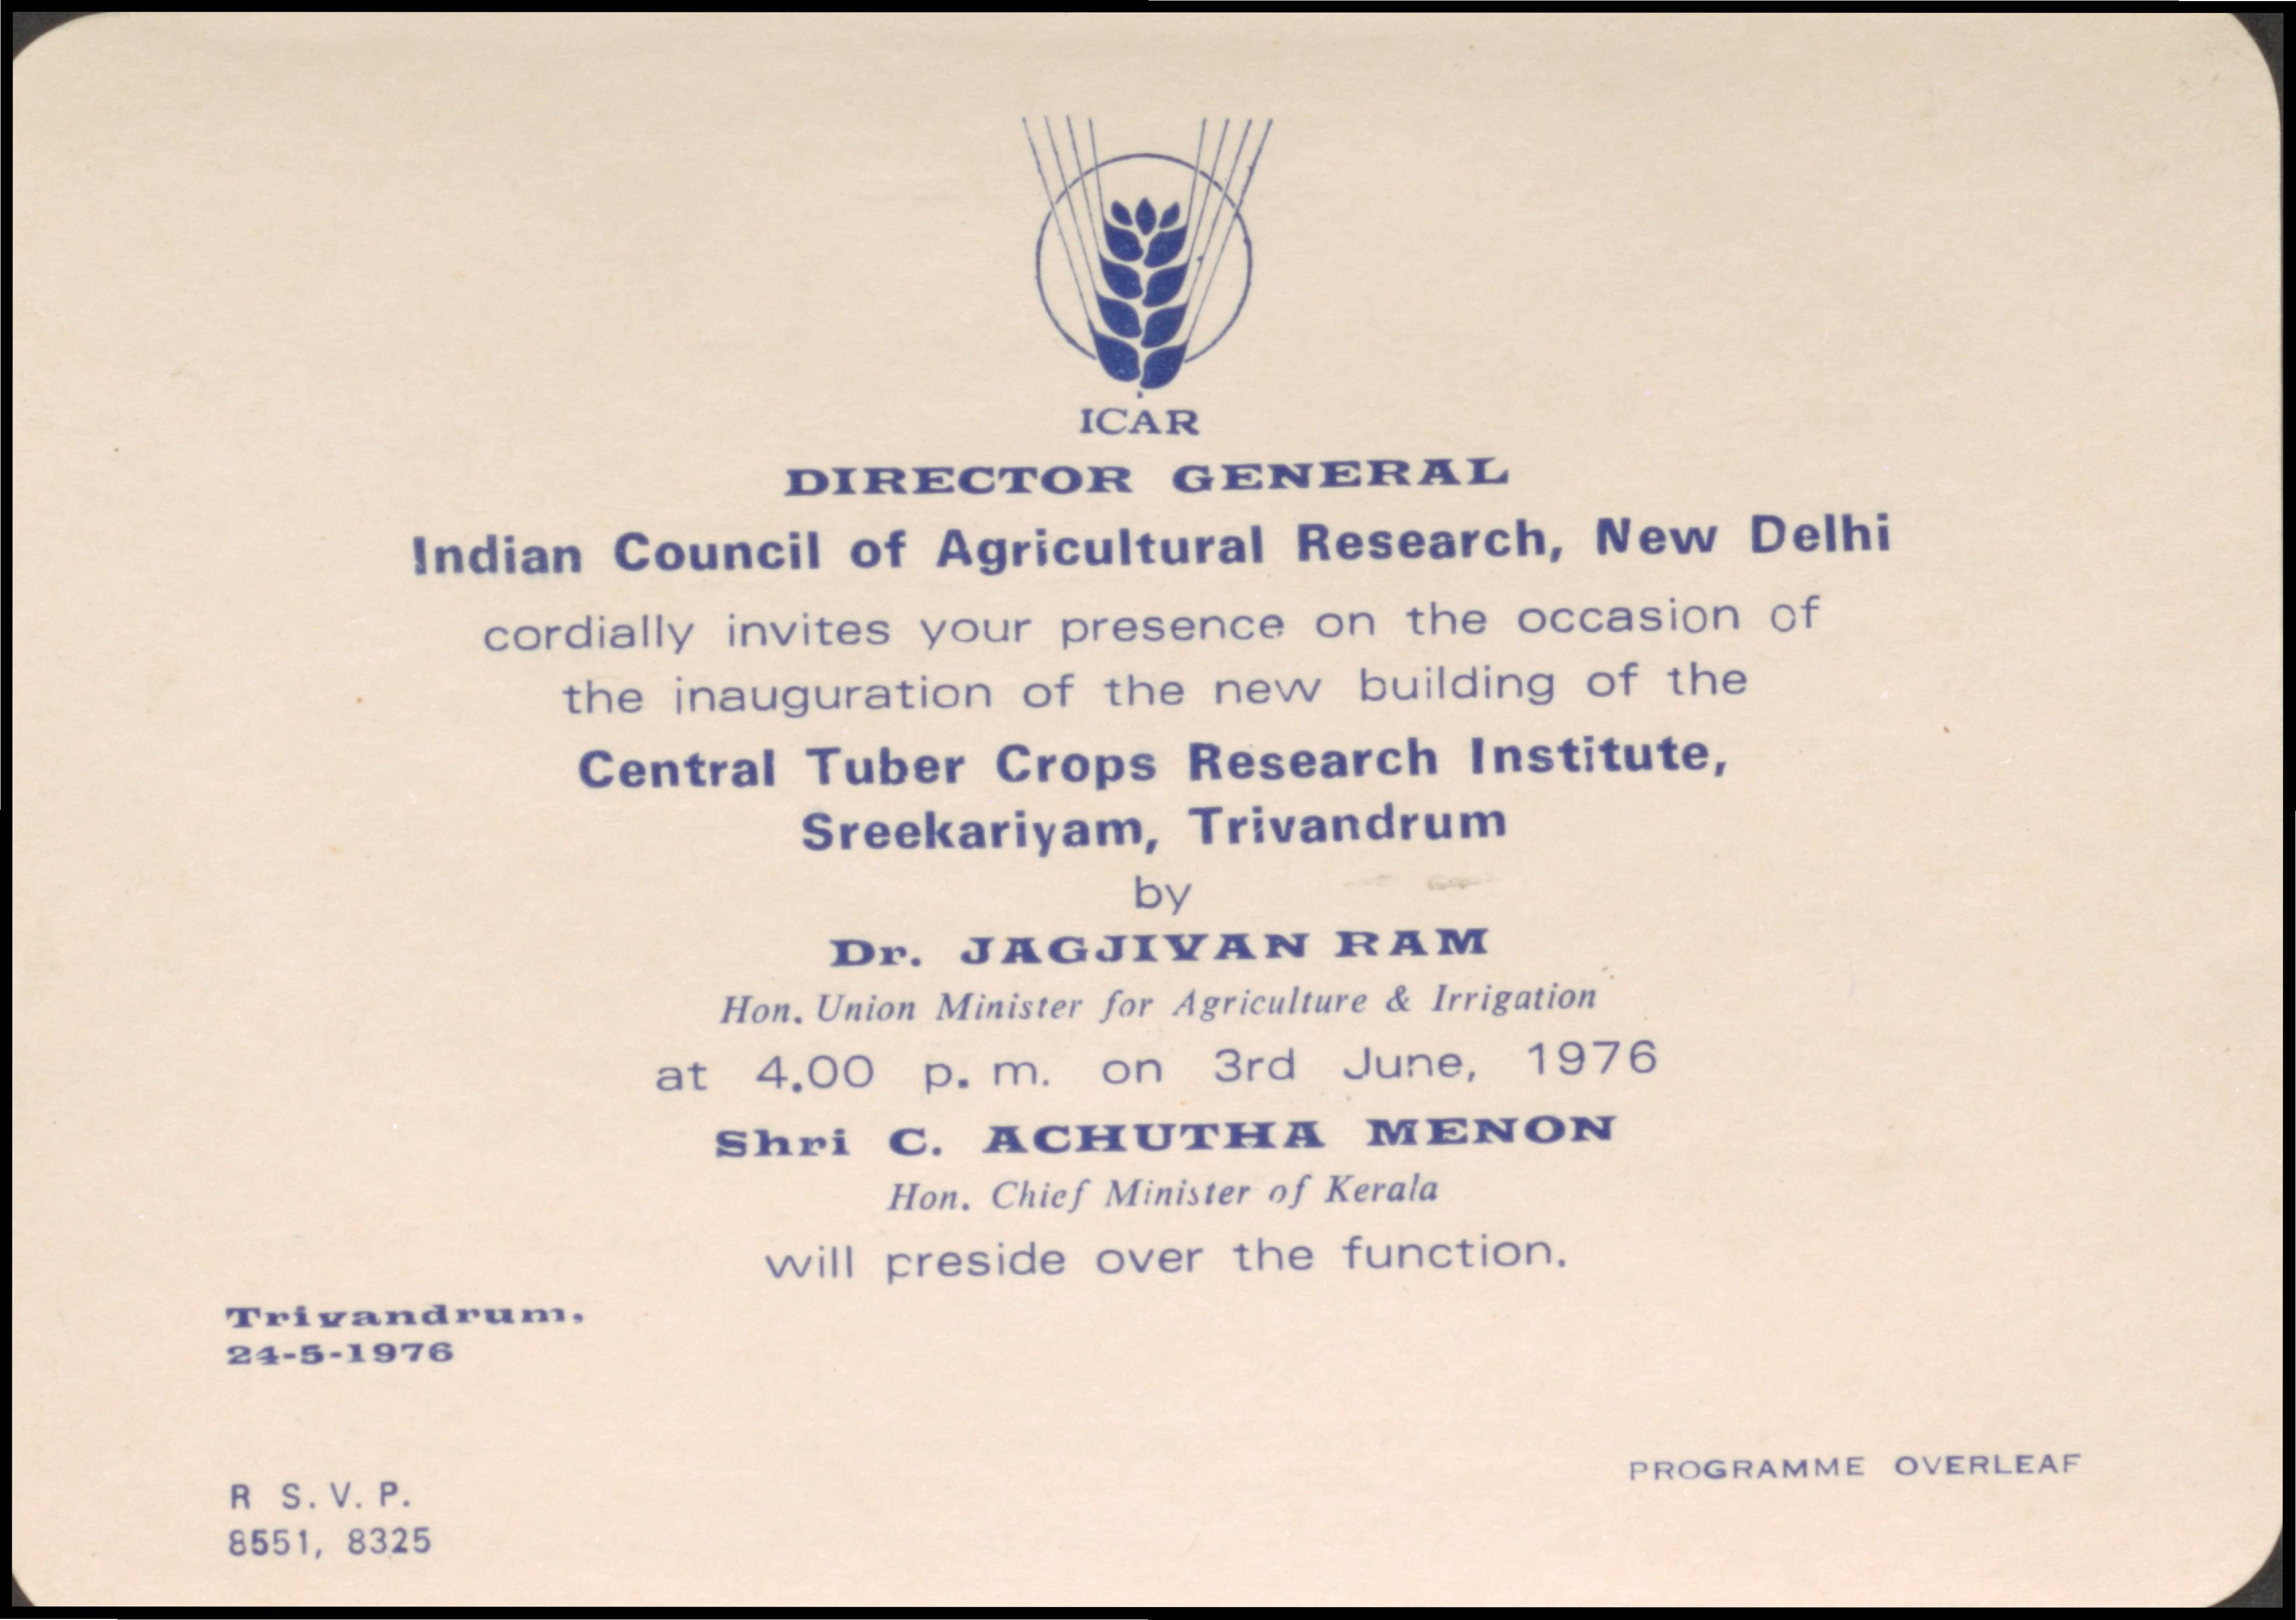 Inauguration of the new building of the Central Tuber Crops Research Institute by Jagjivan Ram